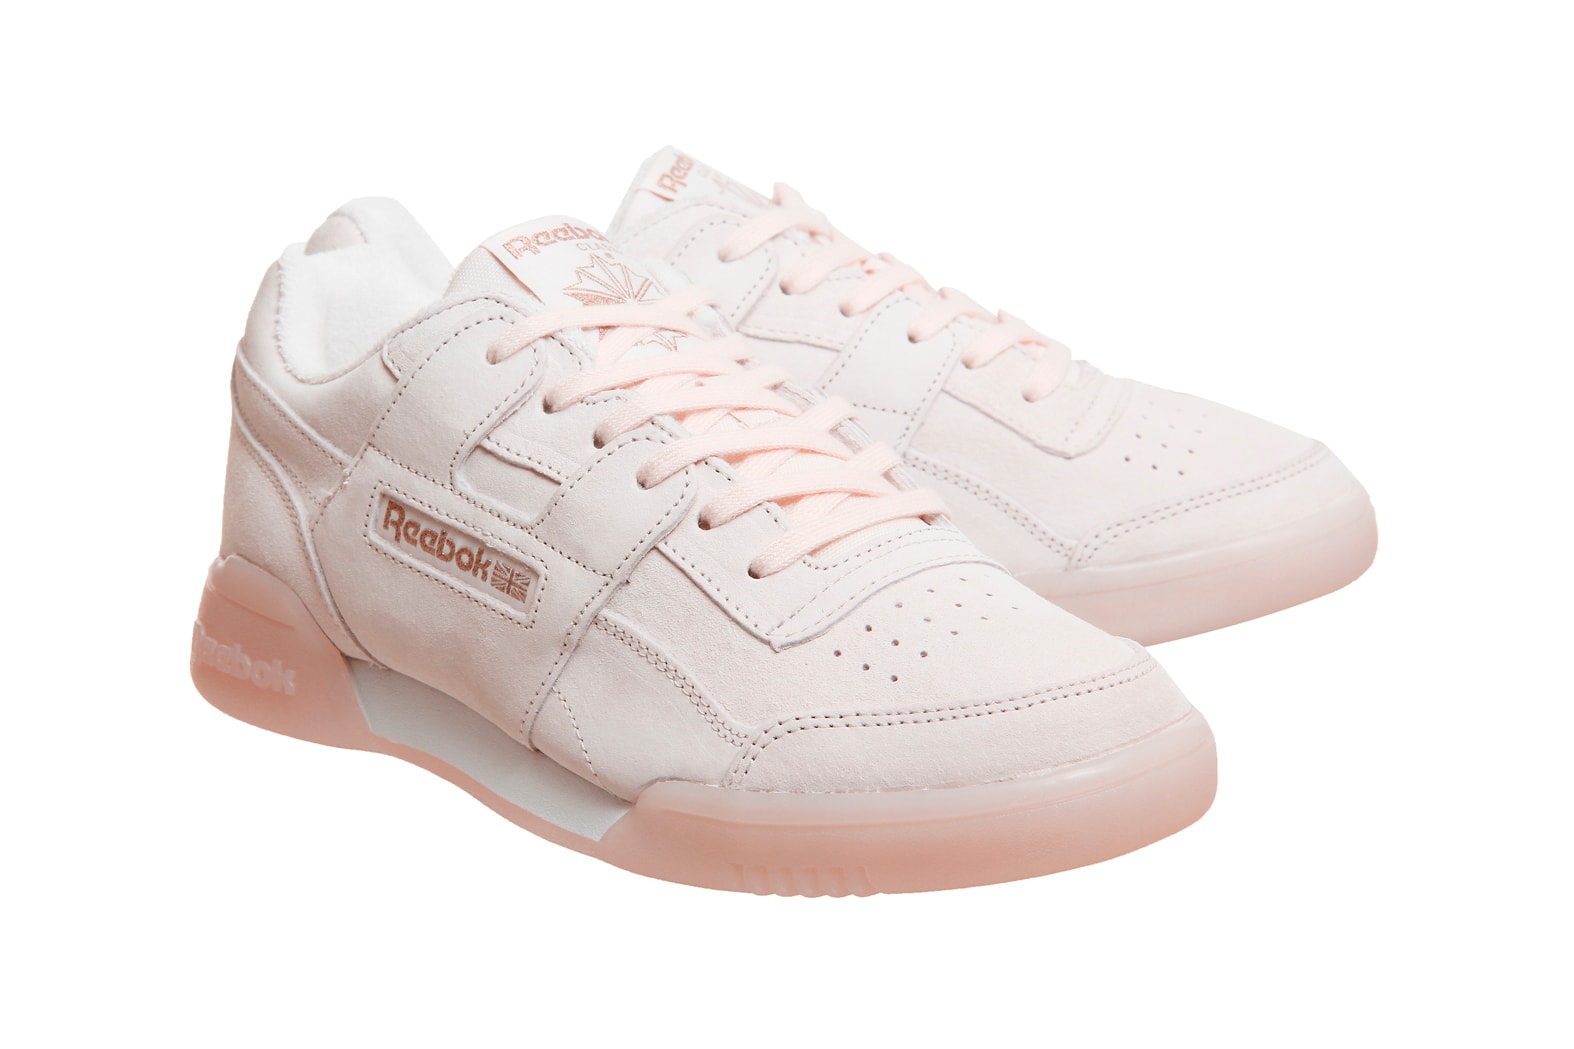 Reebok Workout Plus Pastel Pink Rose Gold metallic light sneakers trainers women's girls ladies exclusive OFFICE where to buy